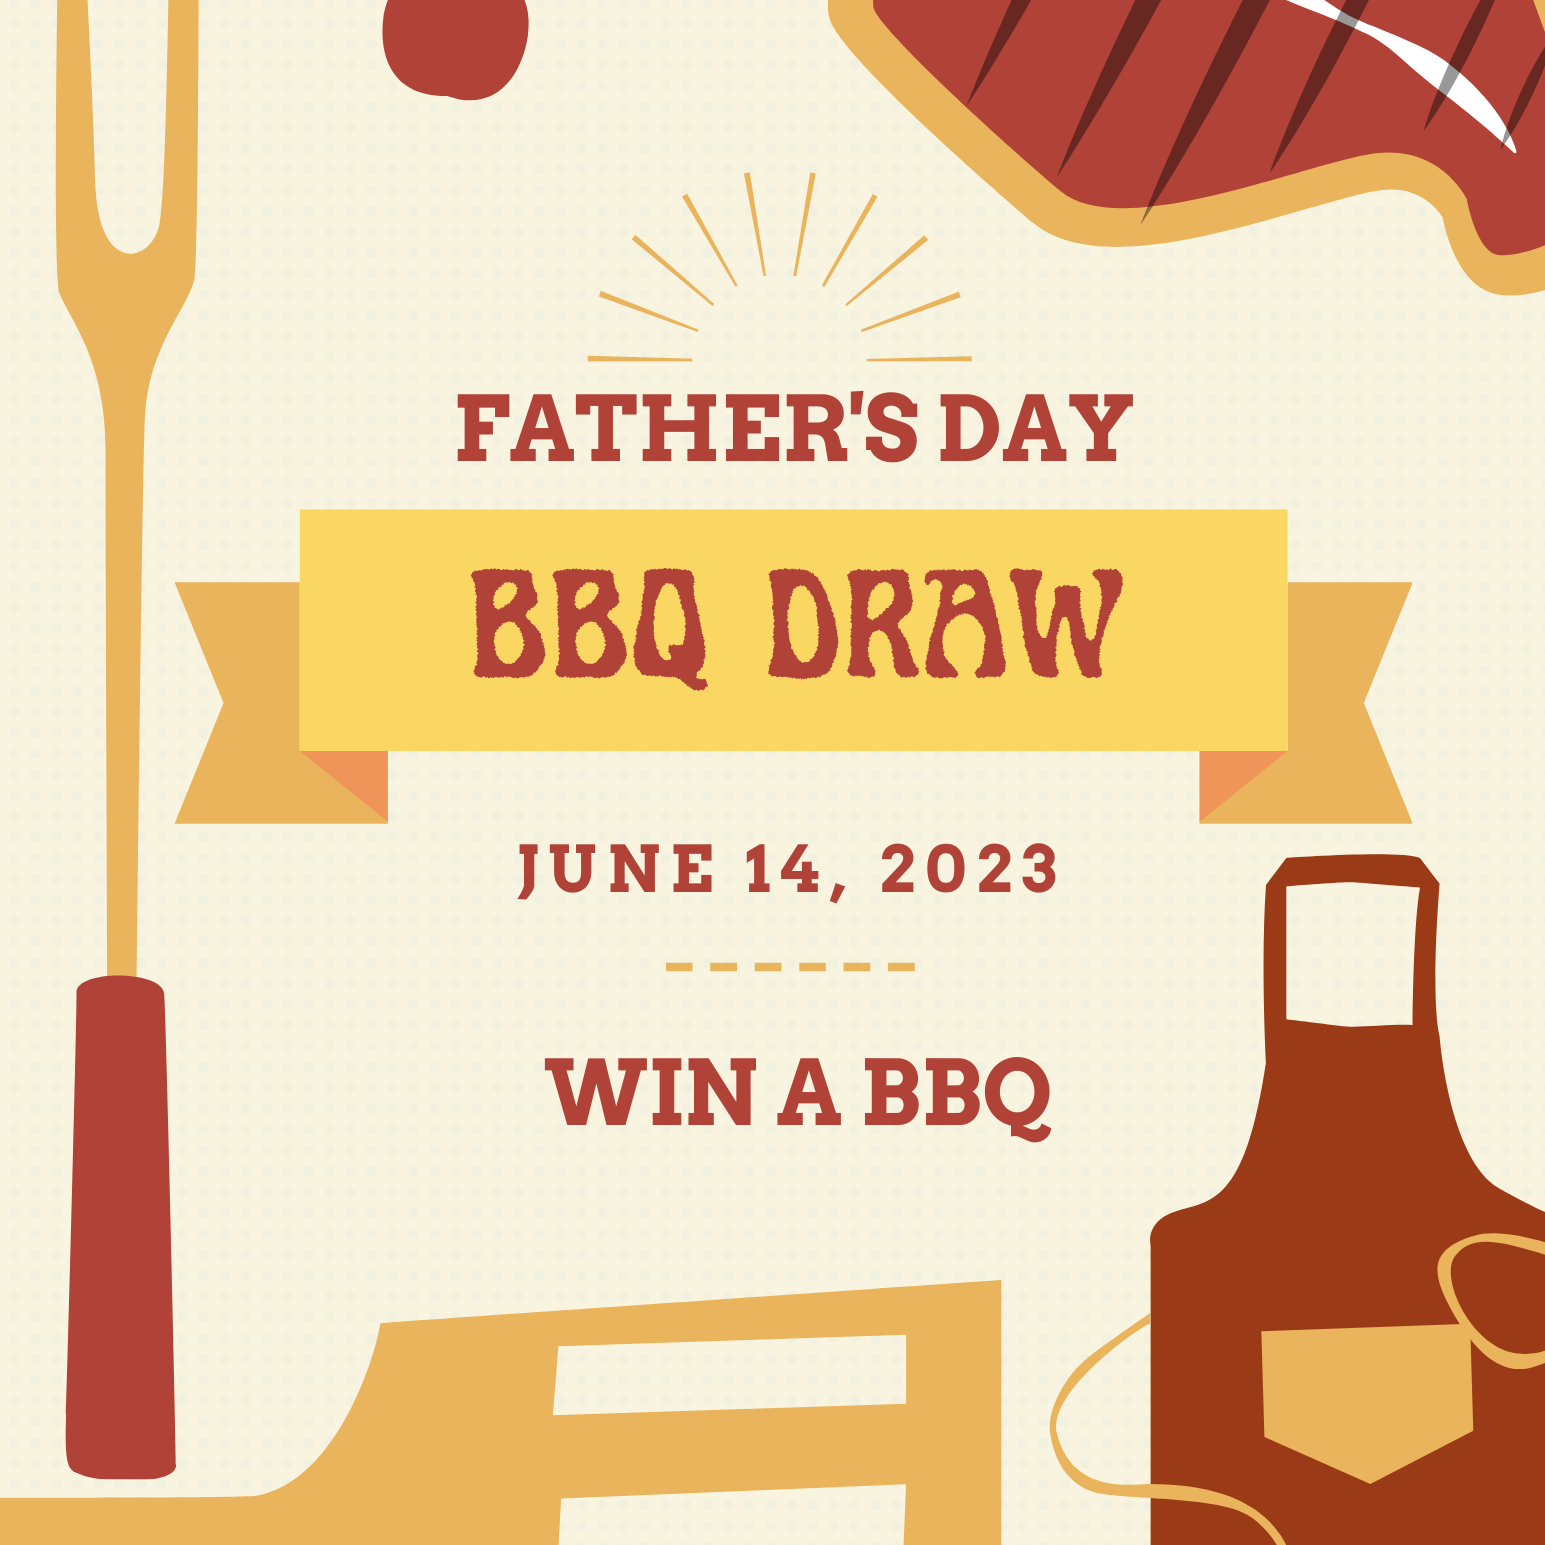 Father’s Day Giveaway